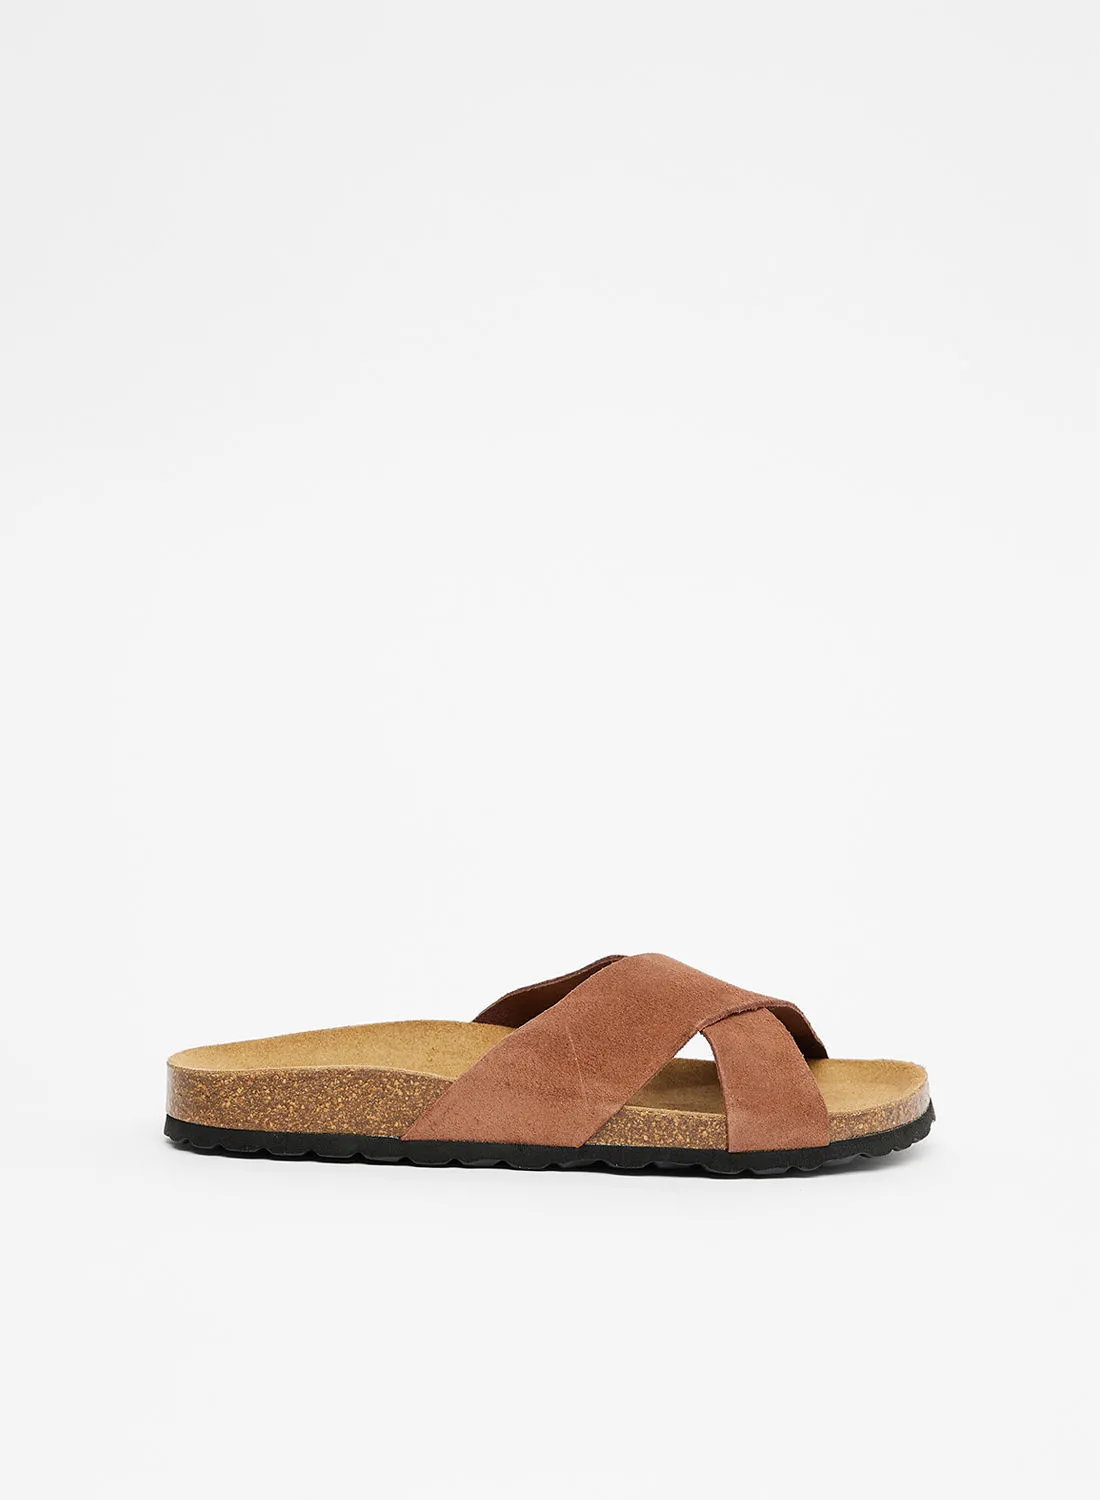 ONLY Suede Flat Sandals